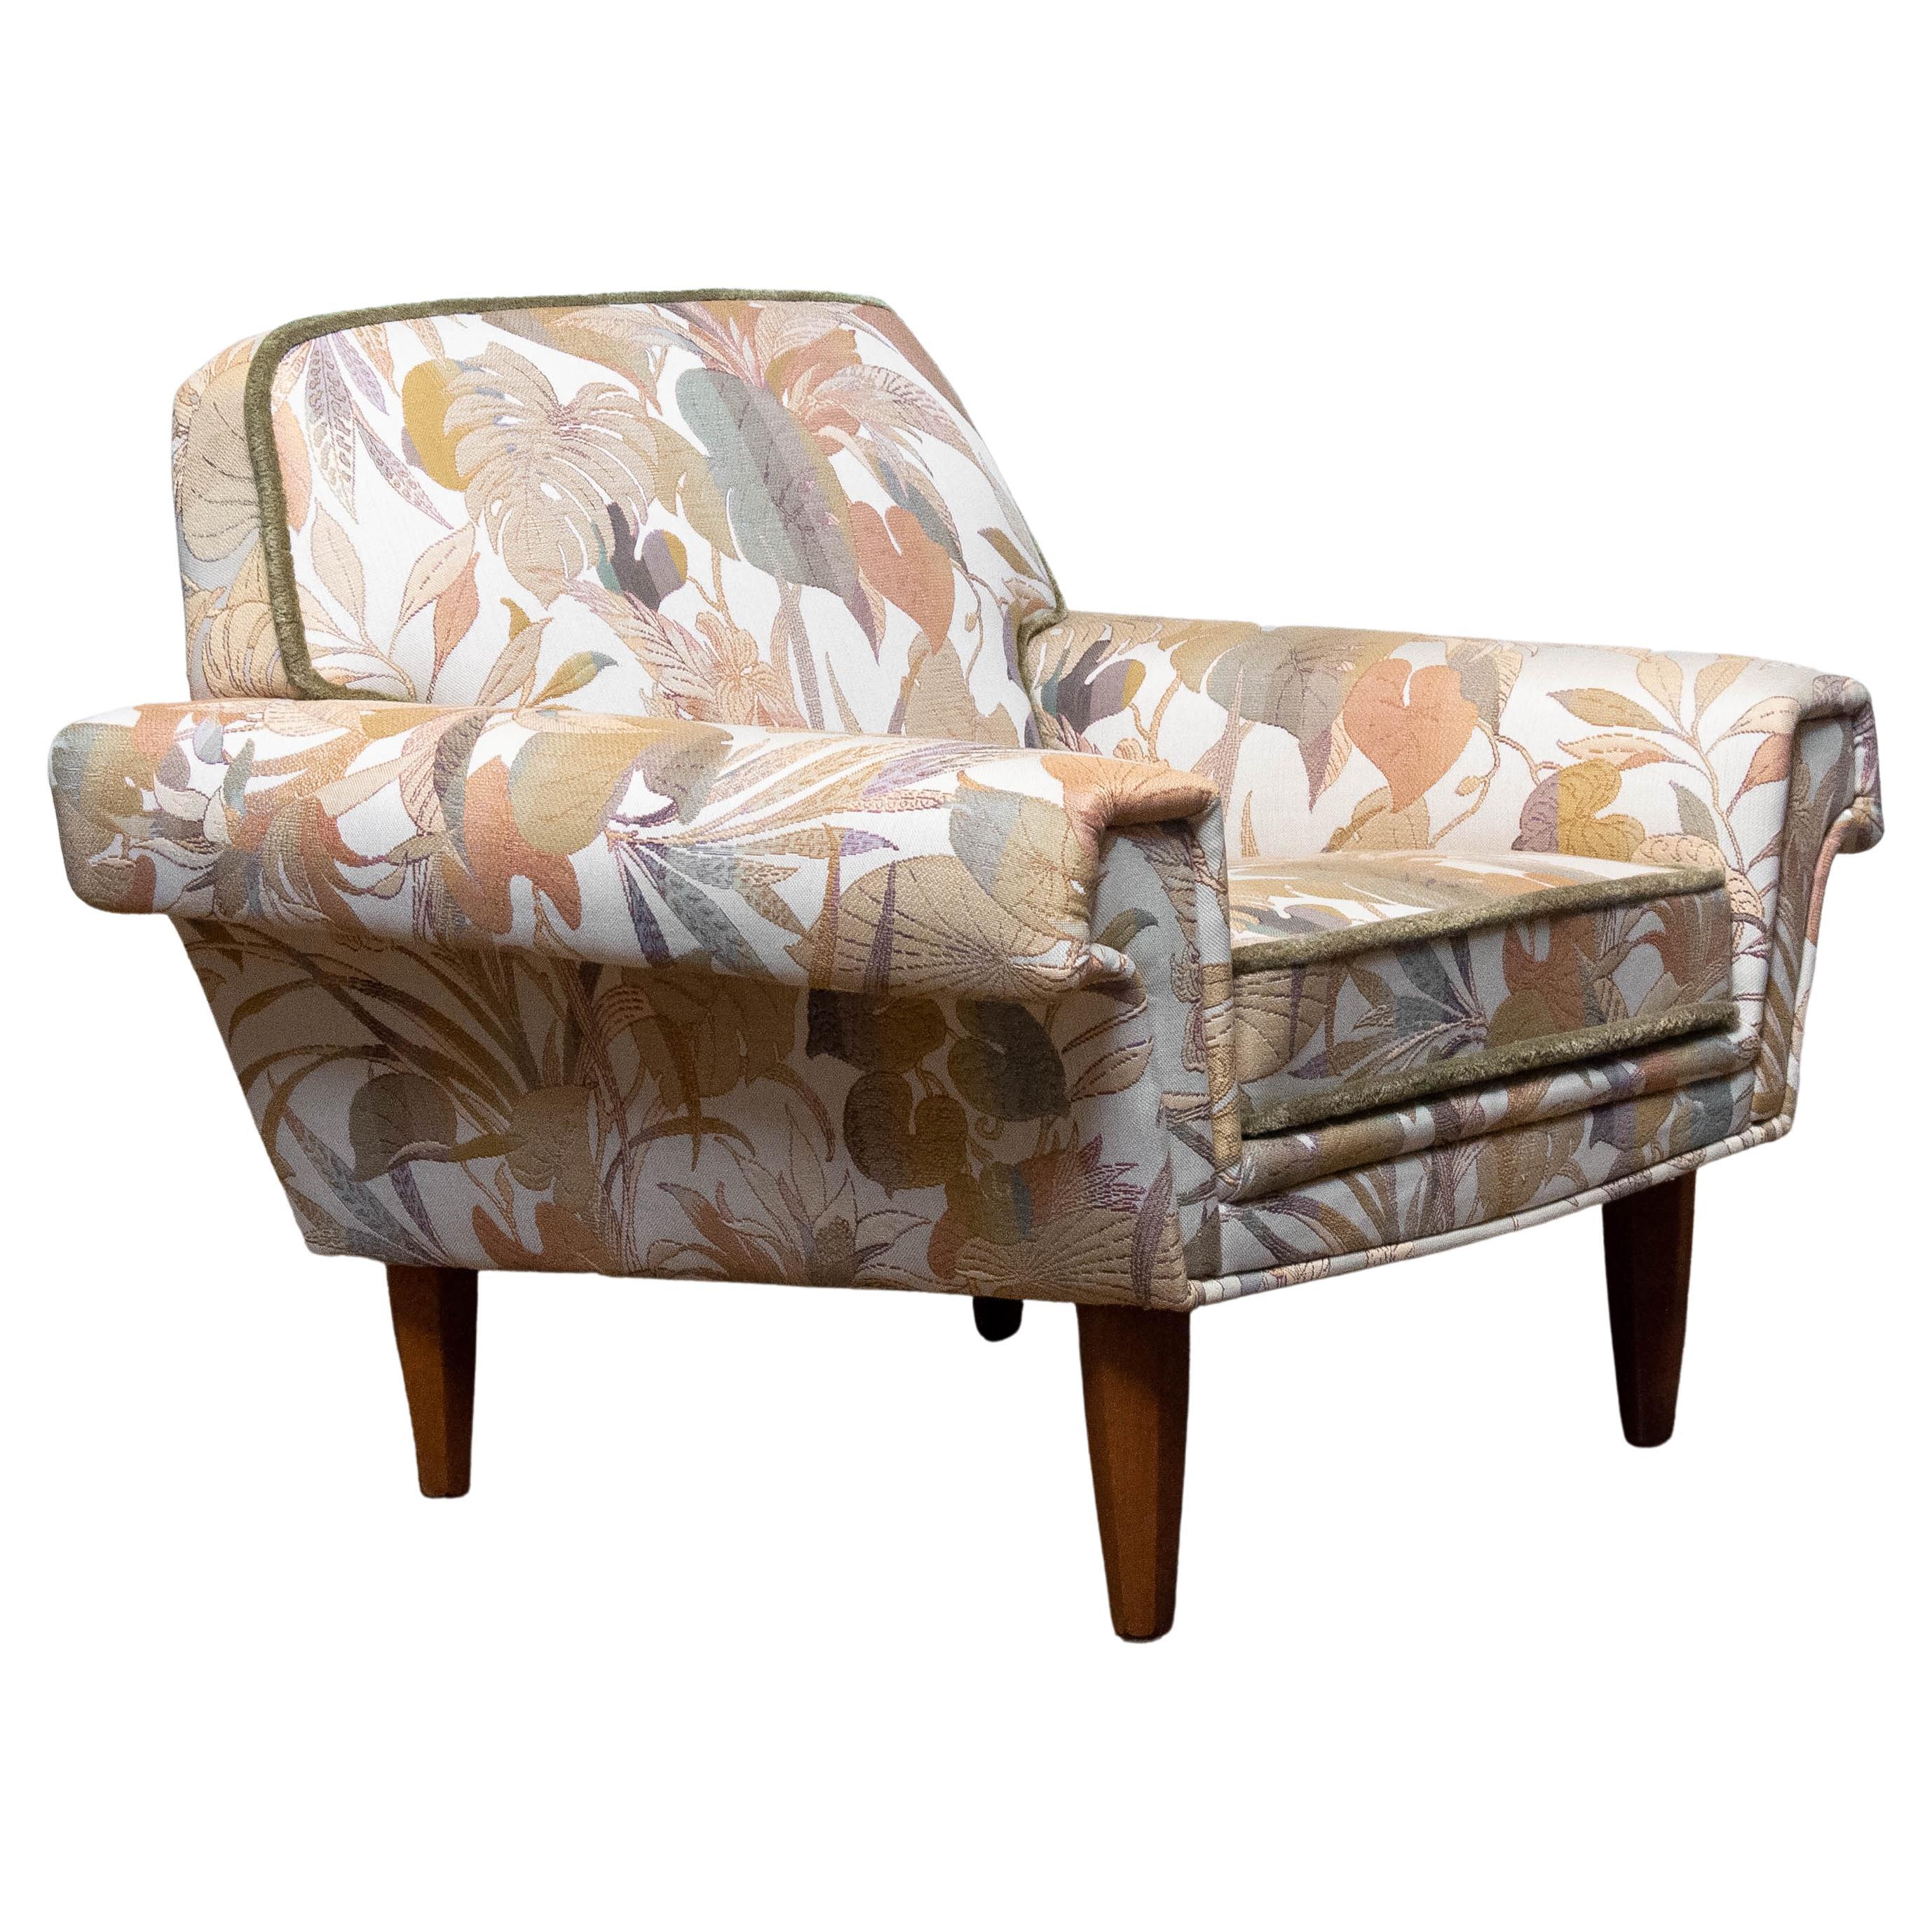 Danish Low Back Lounge Chair Upholstered Floral Jacquard Fabric from the 1970's For Sale